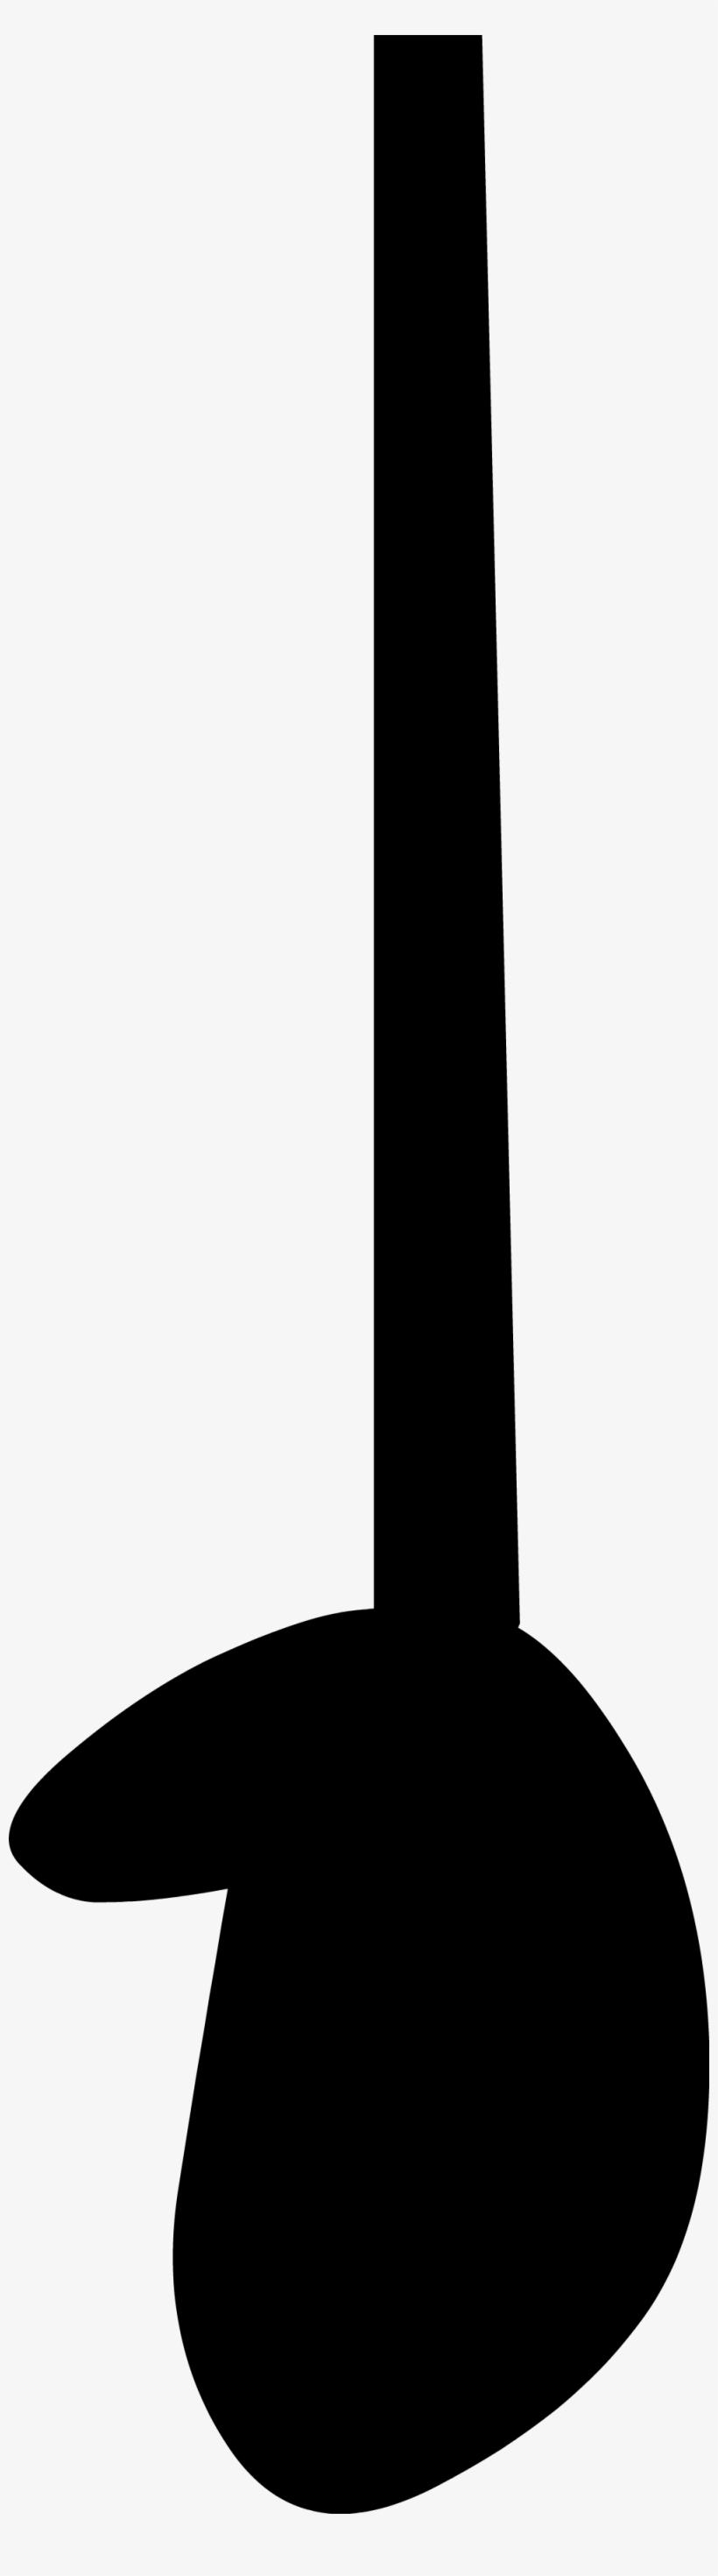 Another Ii Arm - Bfdi Arms Ii, transparent png #1587684